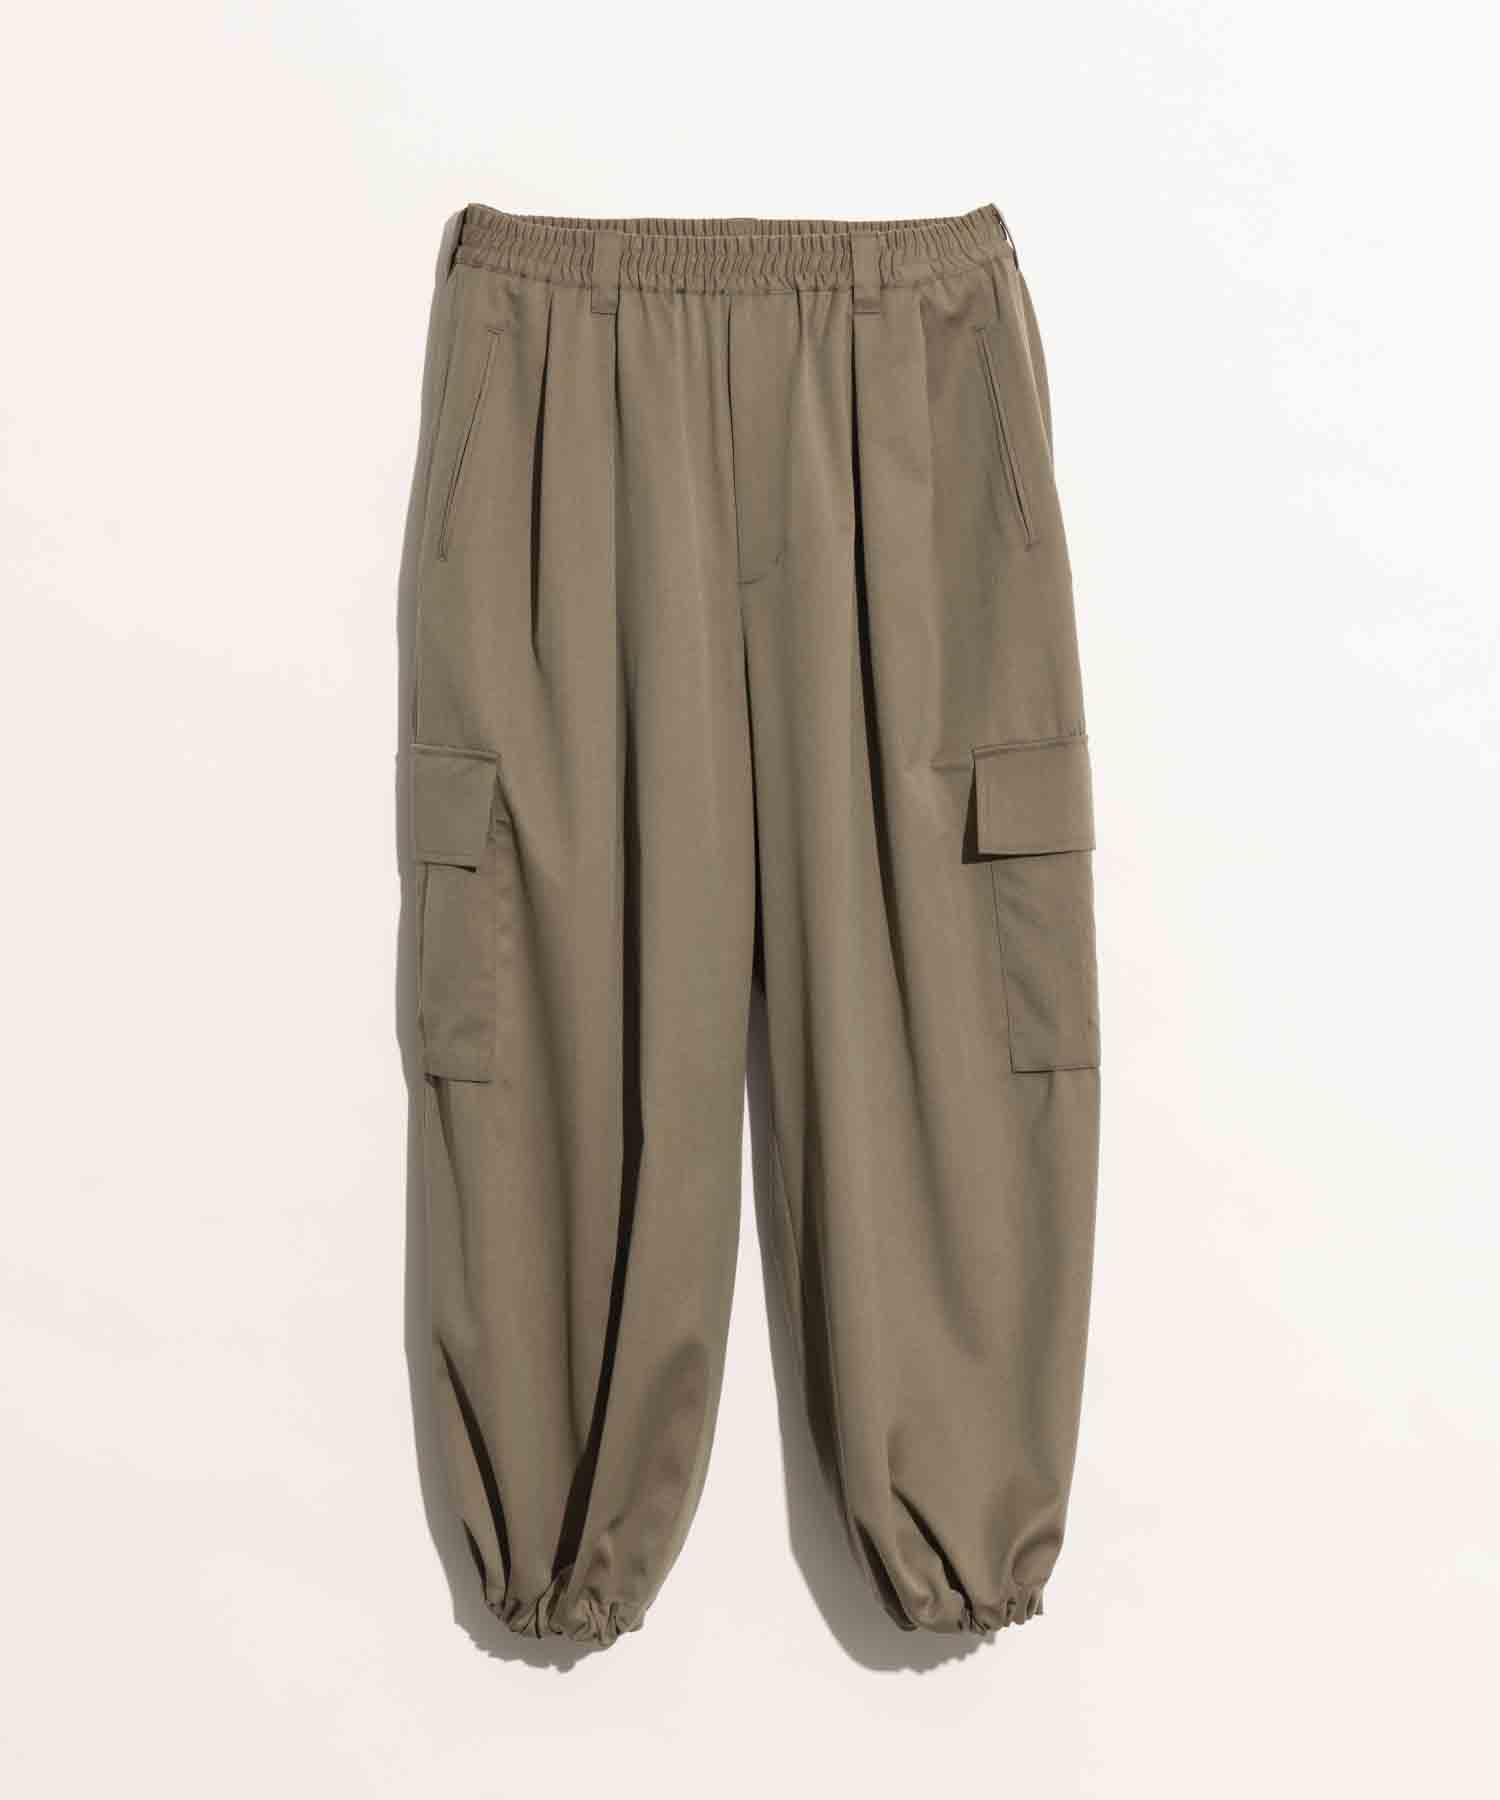 Prime-Wide Wool Chambray Cargo Pants